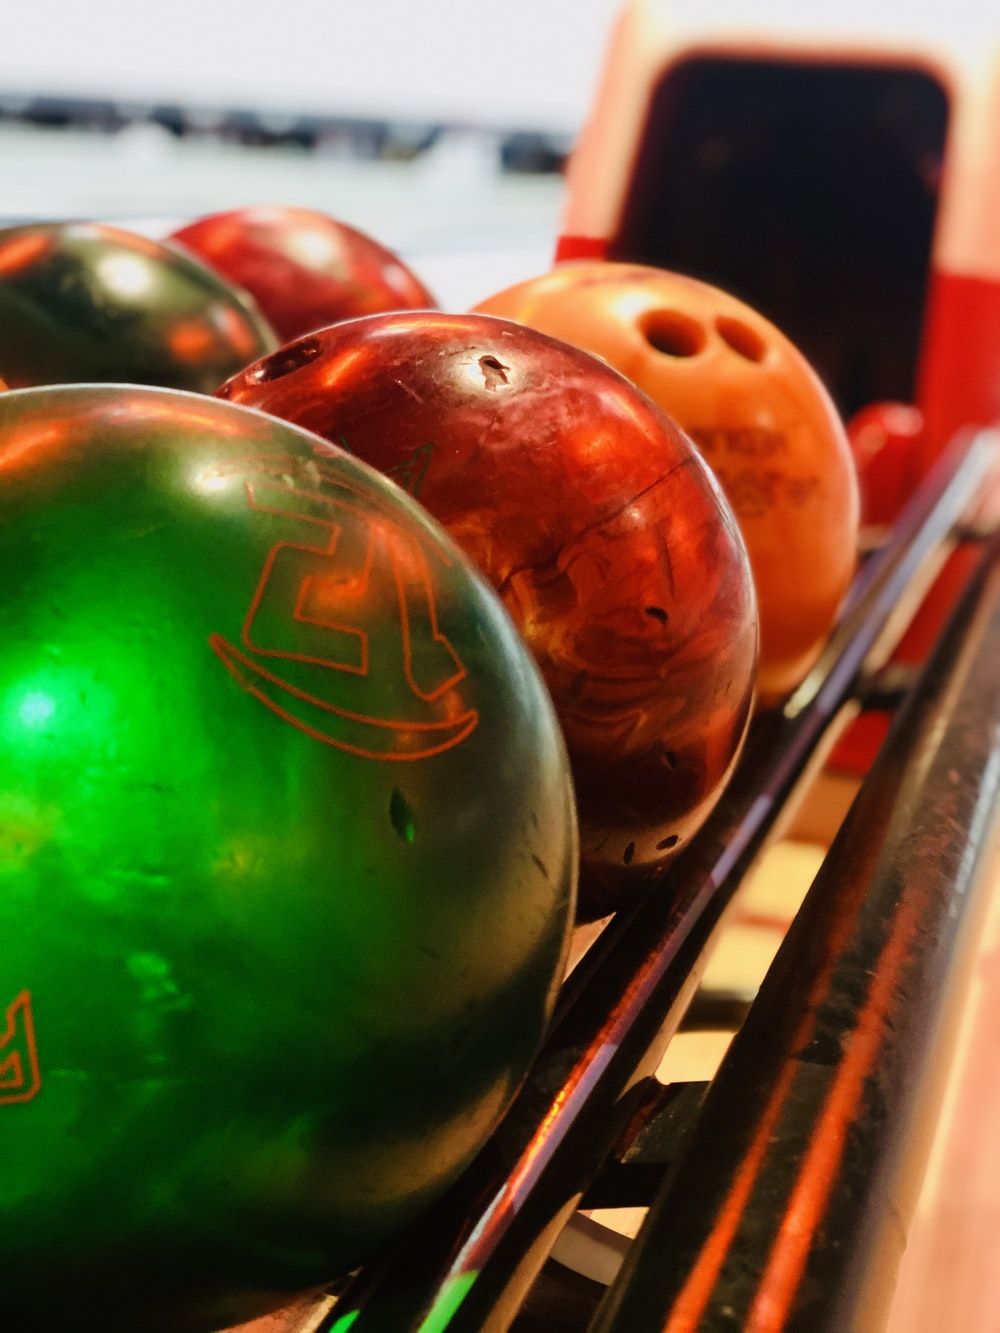 Bowling Ball Picture. Download Free Image